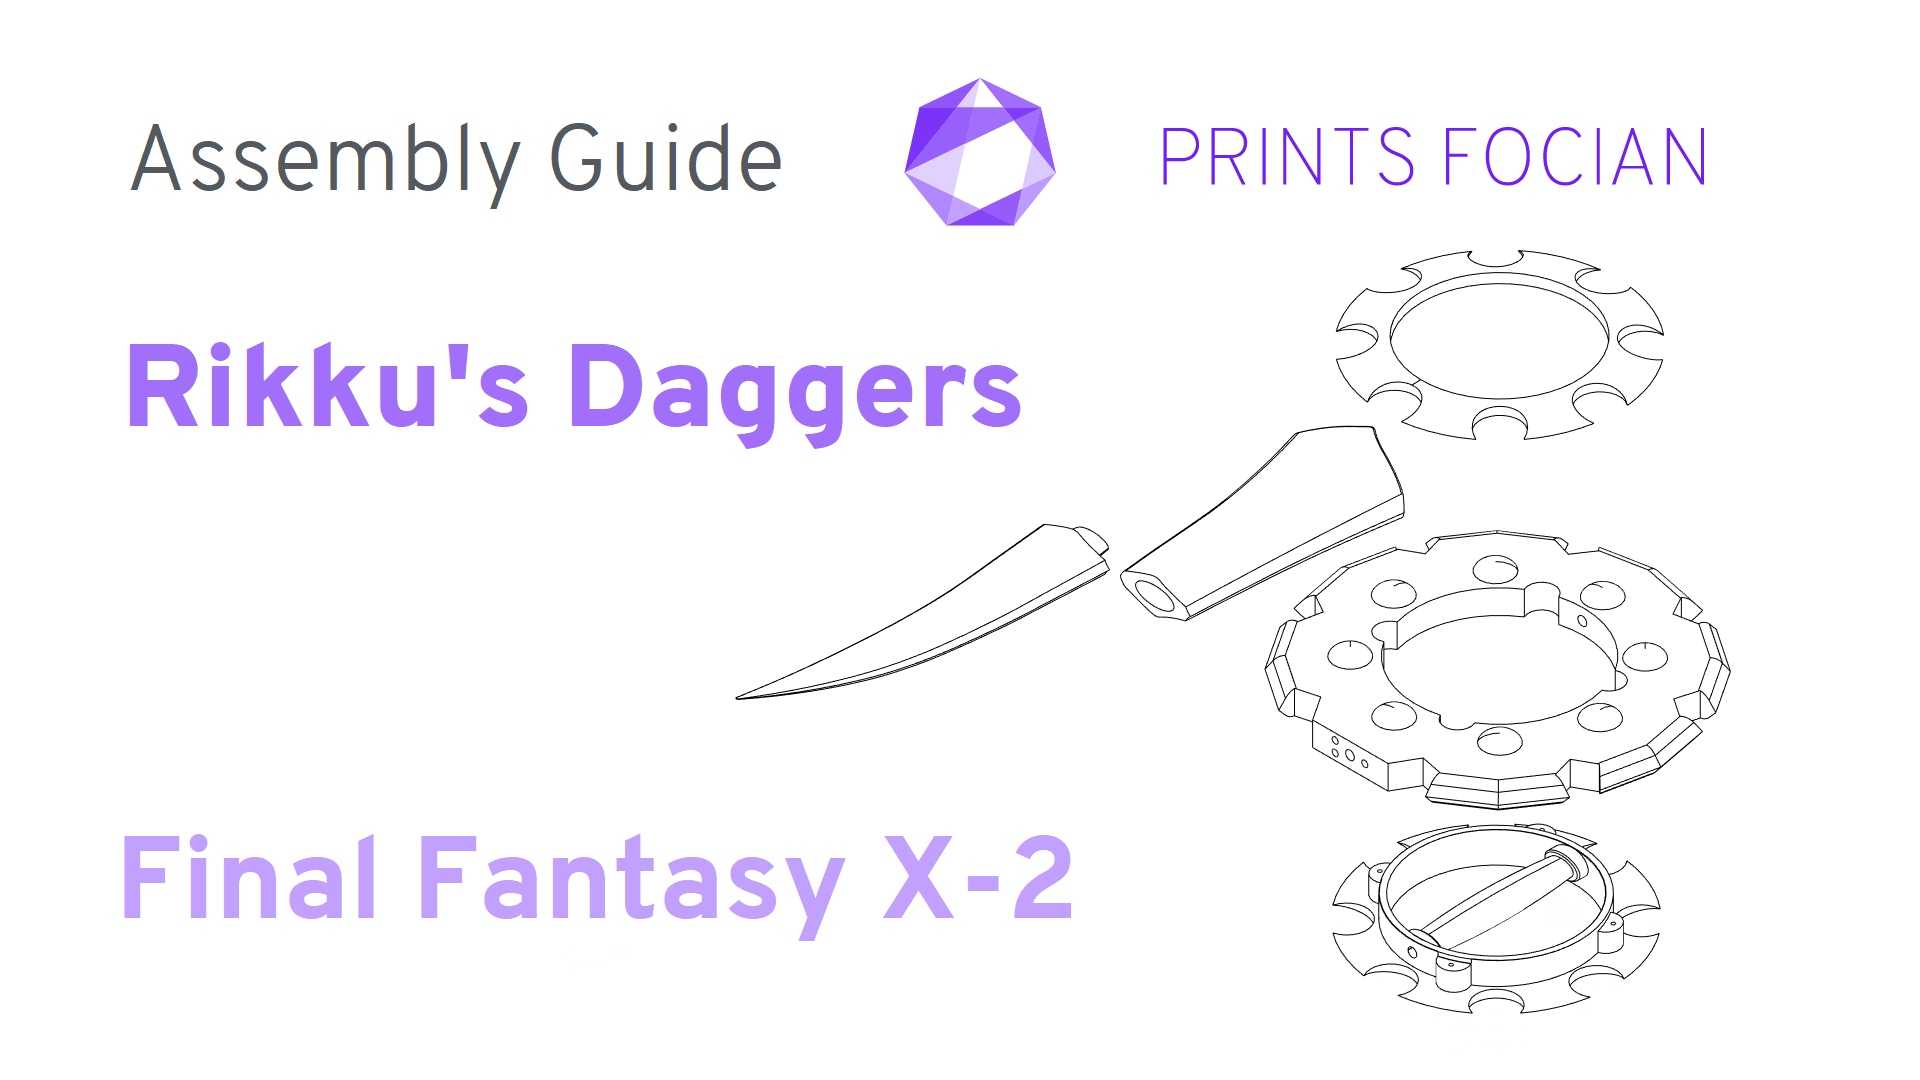 Text: Prints Focian, Assembly Guide, Rikku's Dagger, FInal Fantasy X-2. Image is an exploded view of Render of both of Rikku's daggers FFX-2.